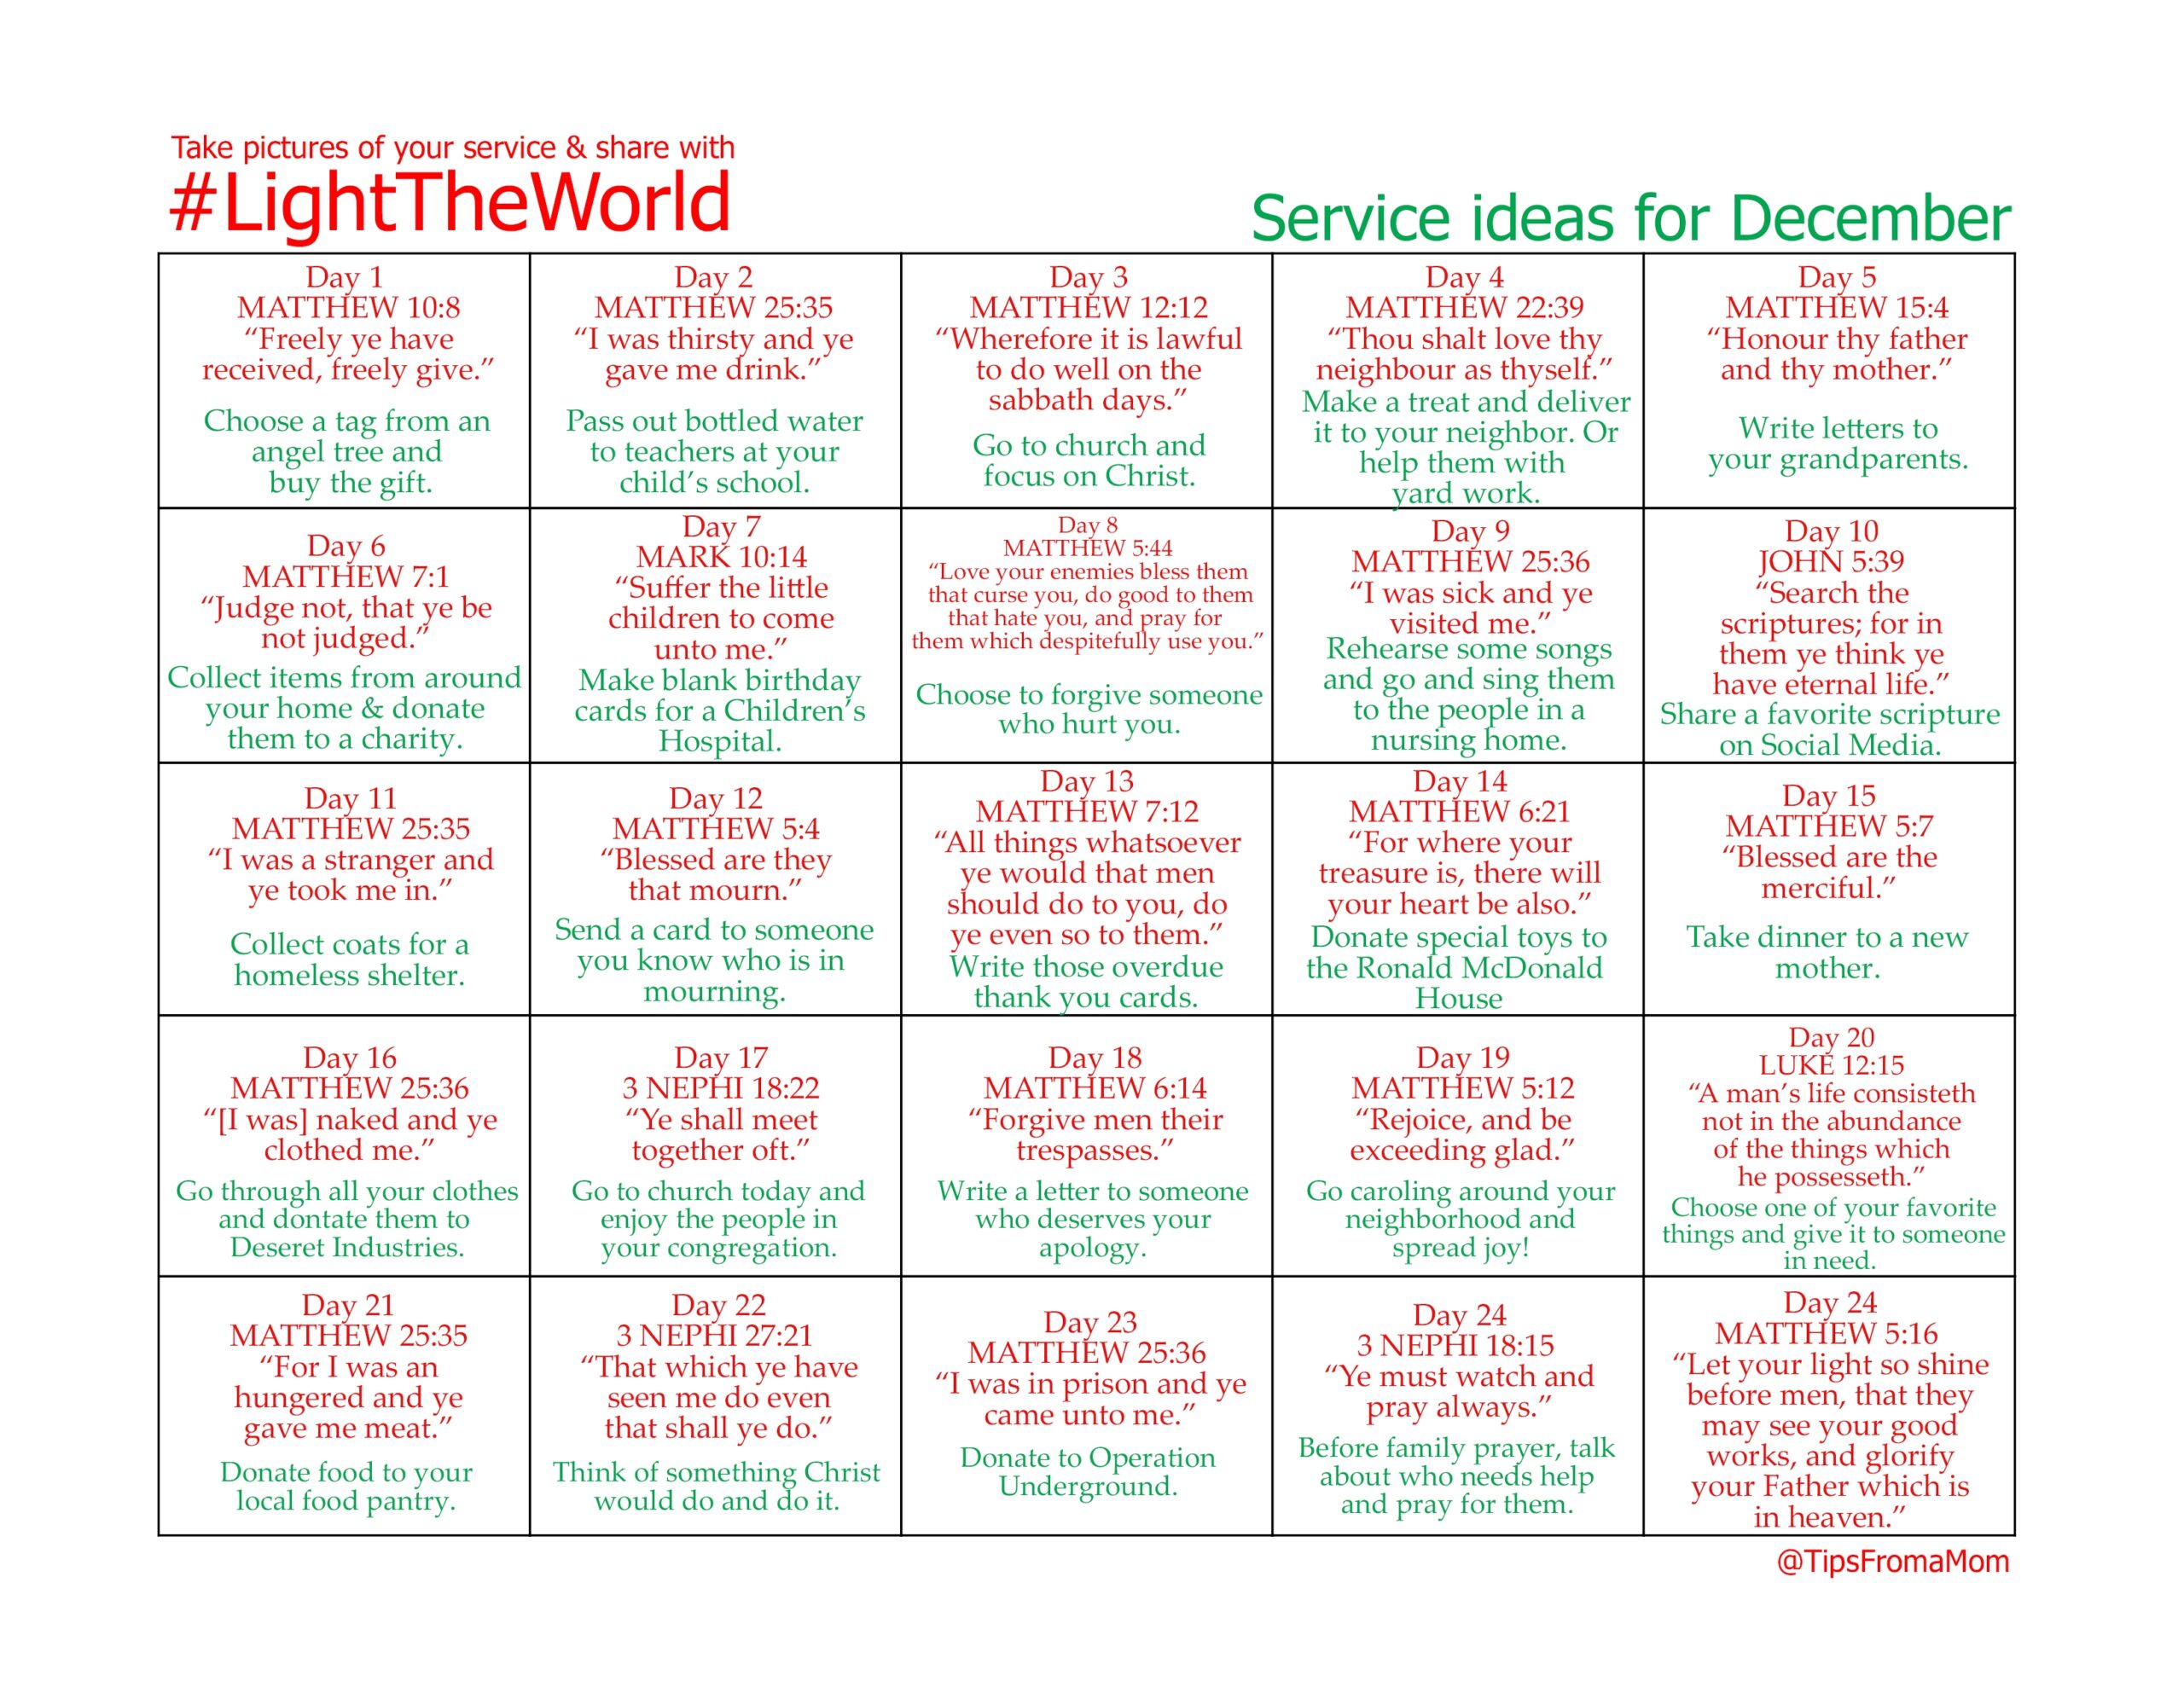 LightTheWorld Service Ideas Calendar Printable How To Keep Christ In Christmas Tips From A Typical Mom